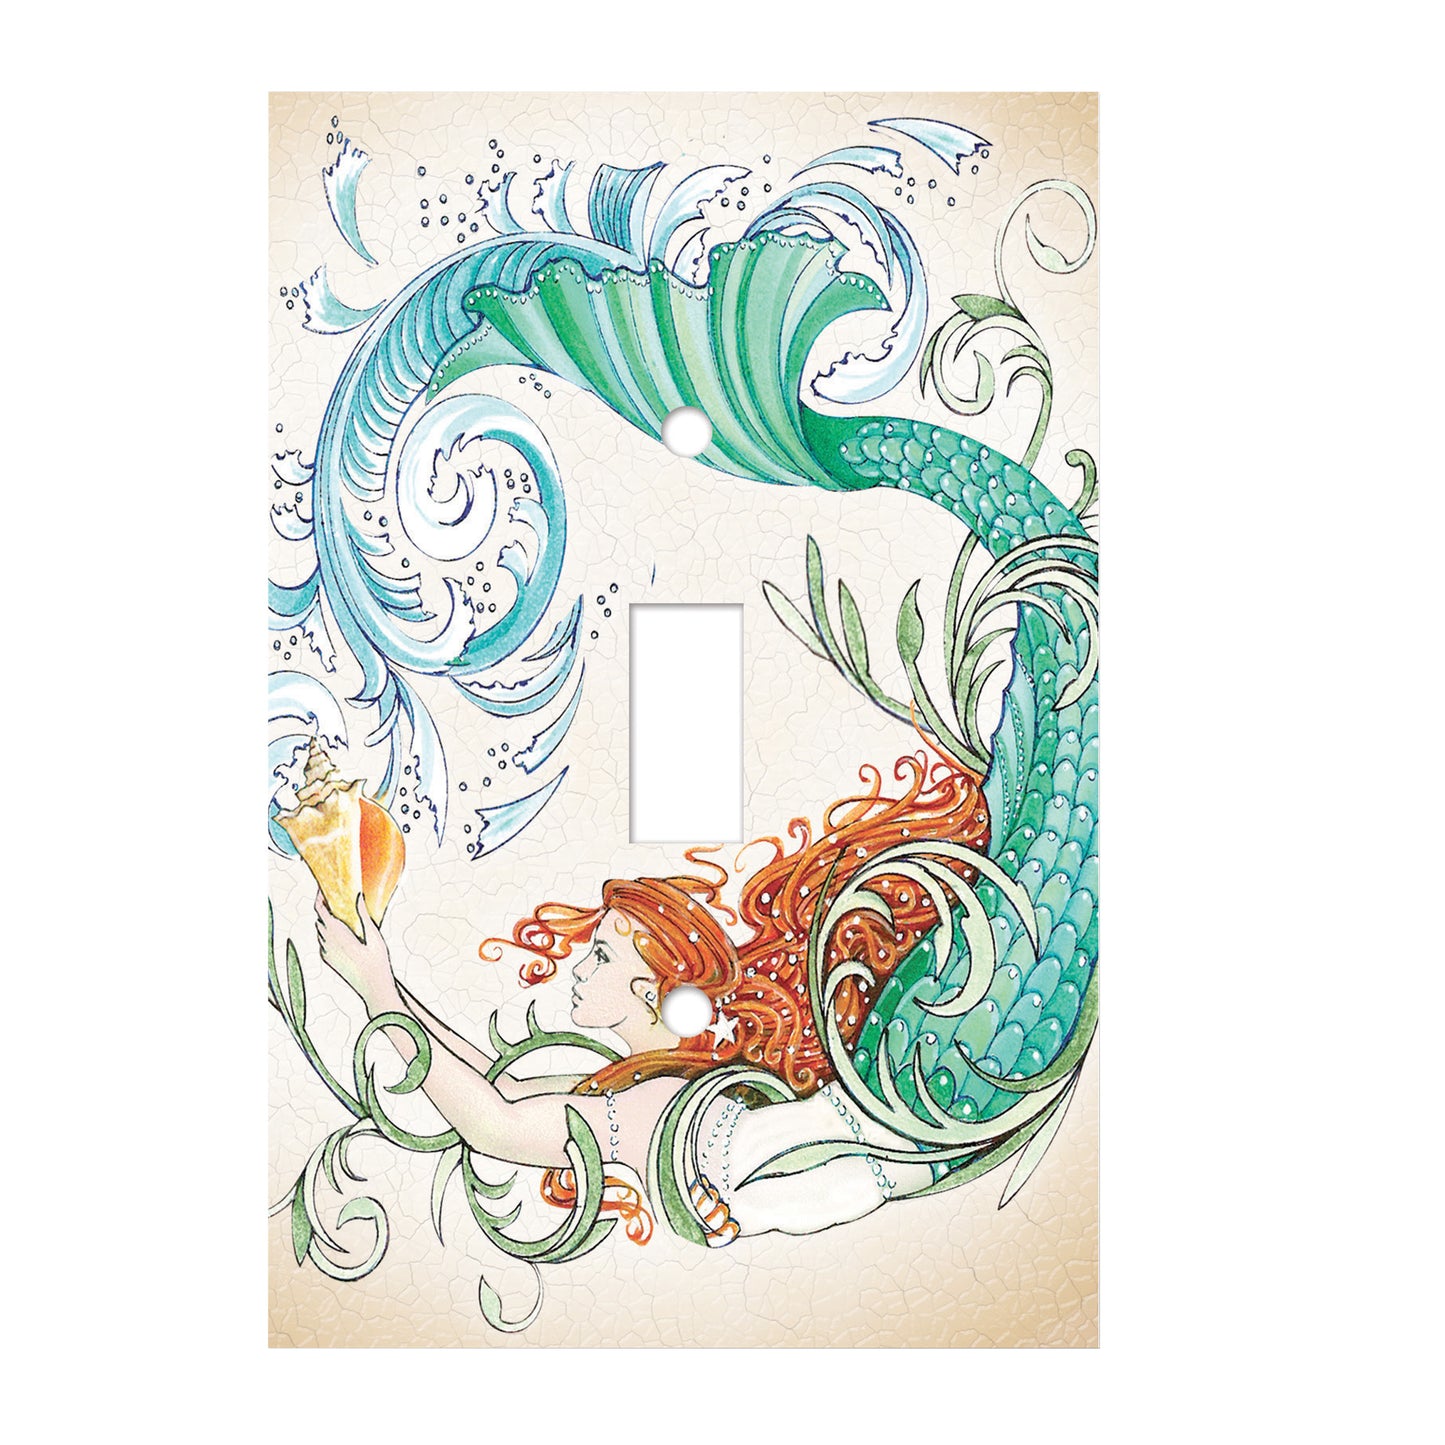 ceramic single toggle switch plate featuring illustrative graphic of a mermaid with a green tail holding a conch shell.